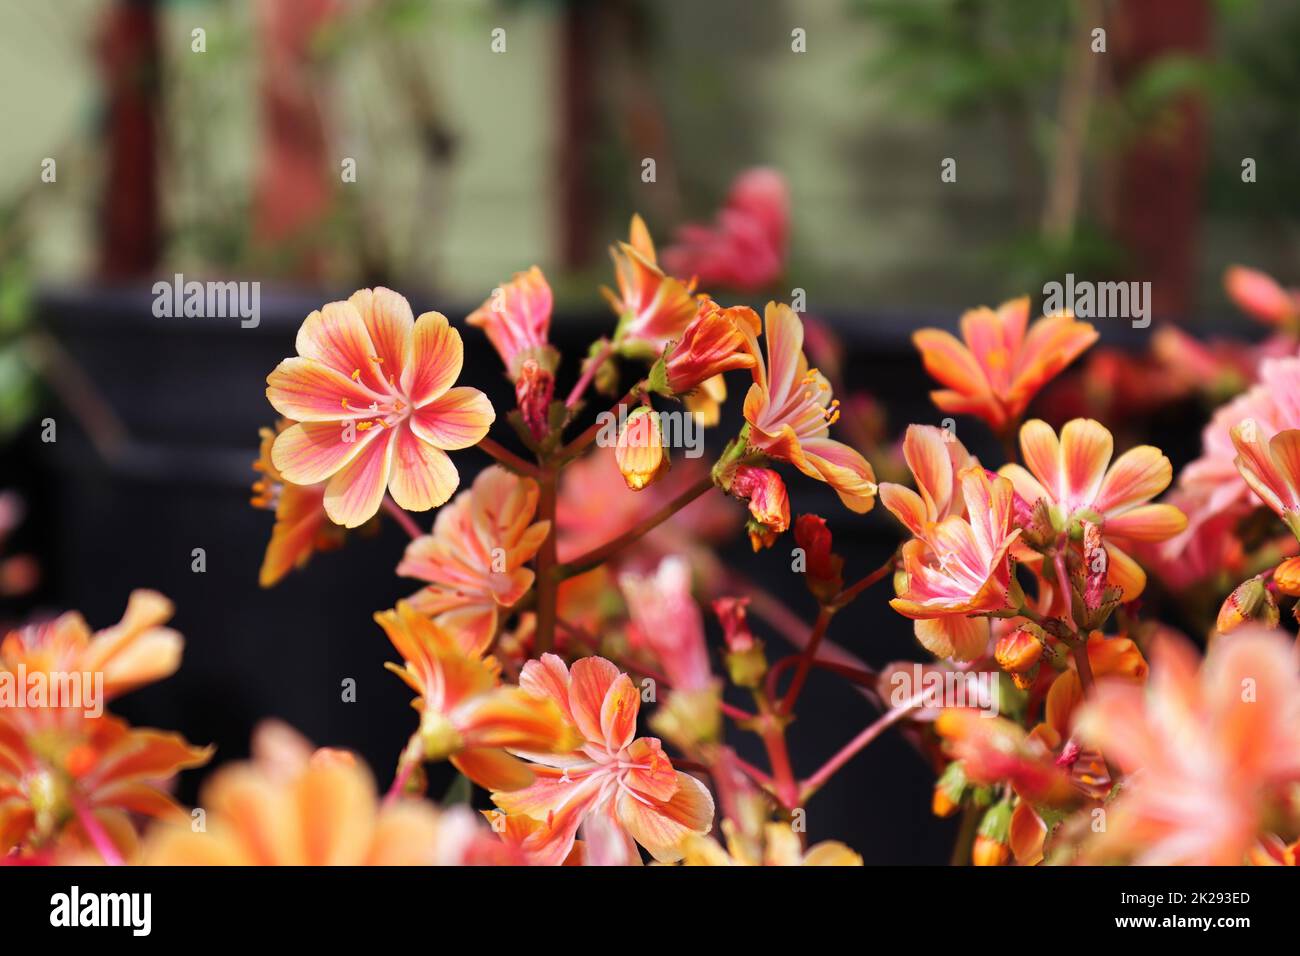 Closeup view of the delicate petals on a lewisia plant Stock Photo